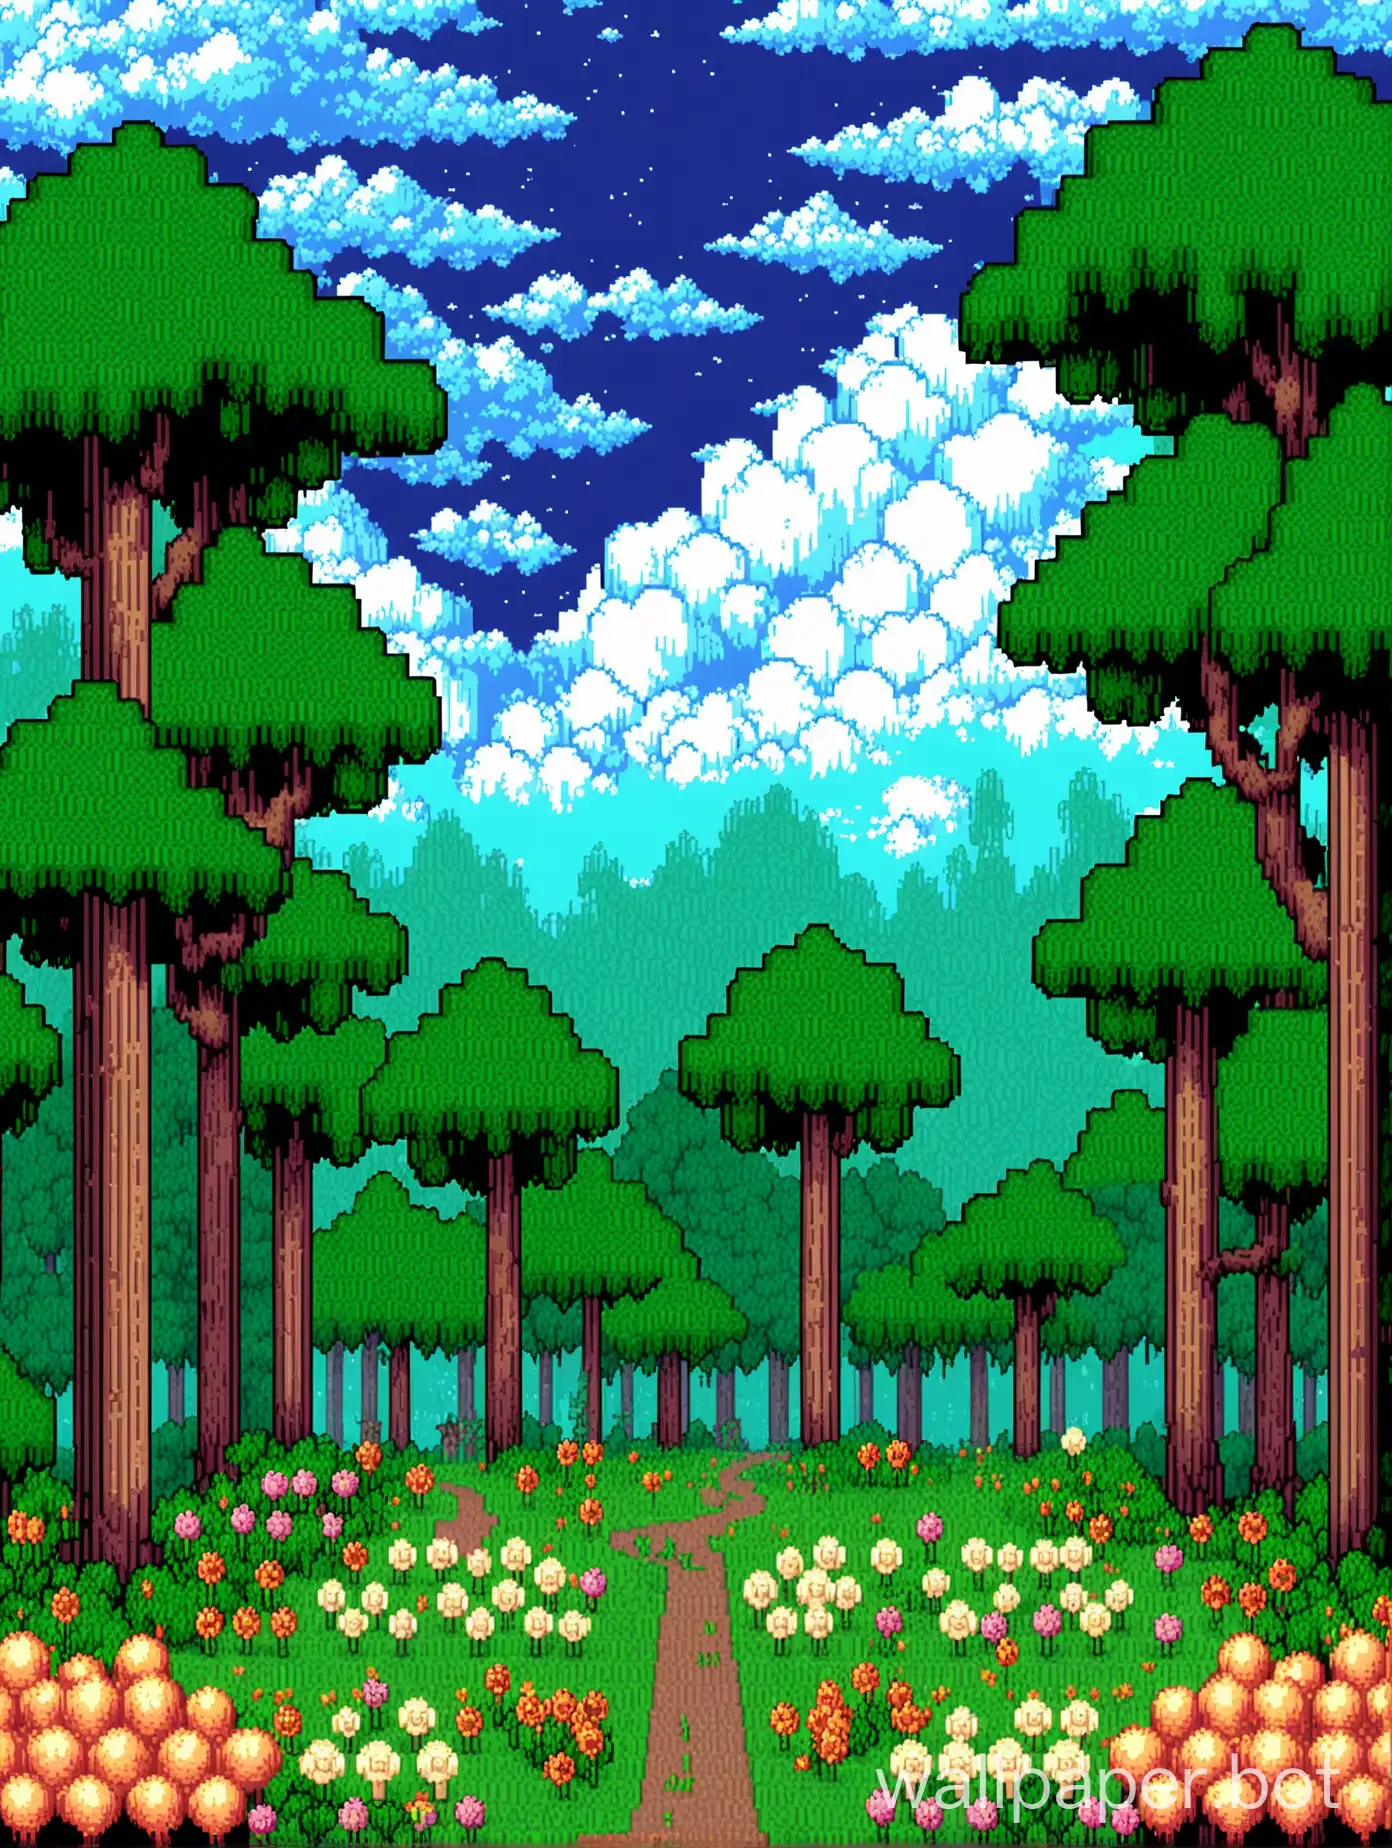 a forest pixel art video game 8 bit with lots of clouds and trees and flowers